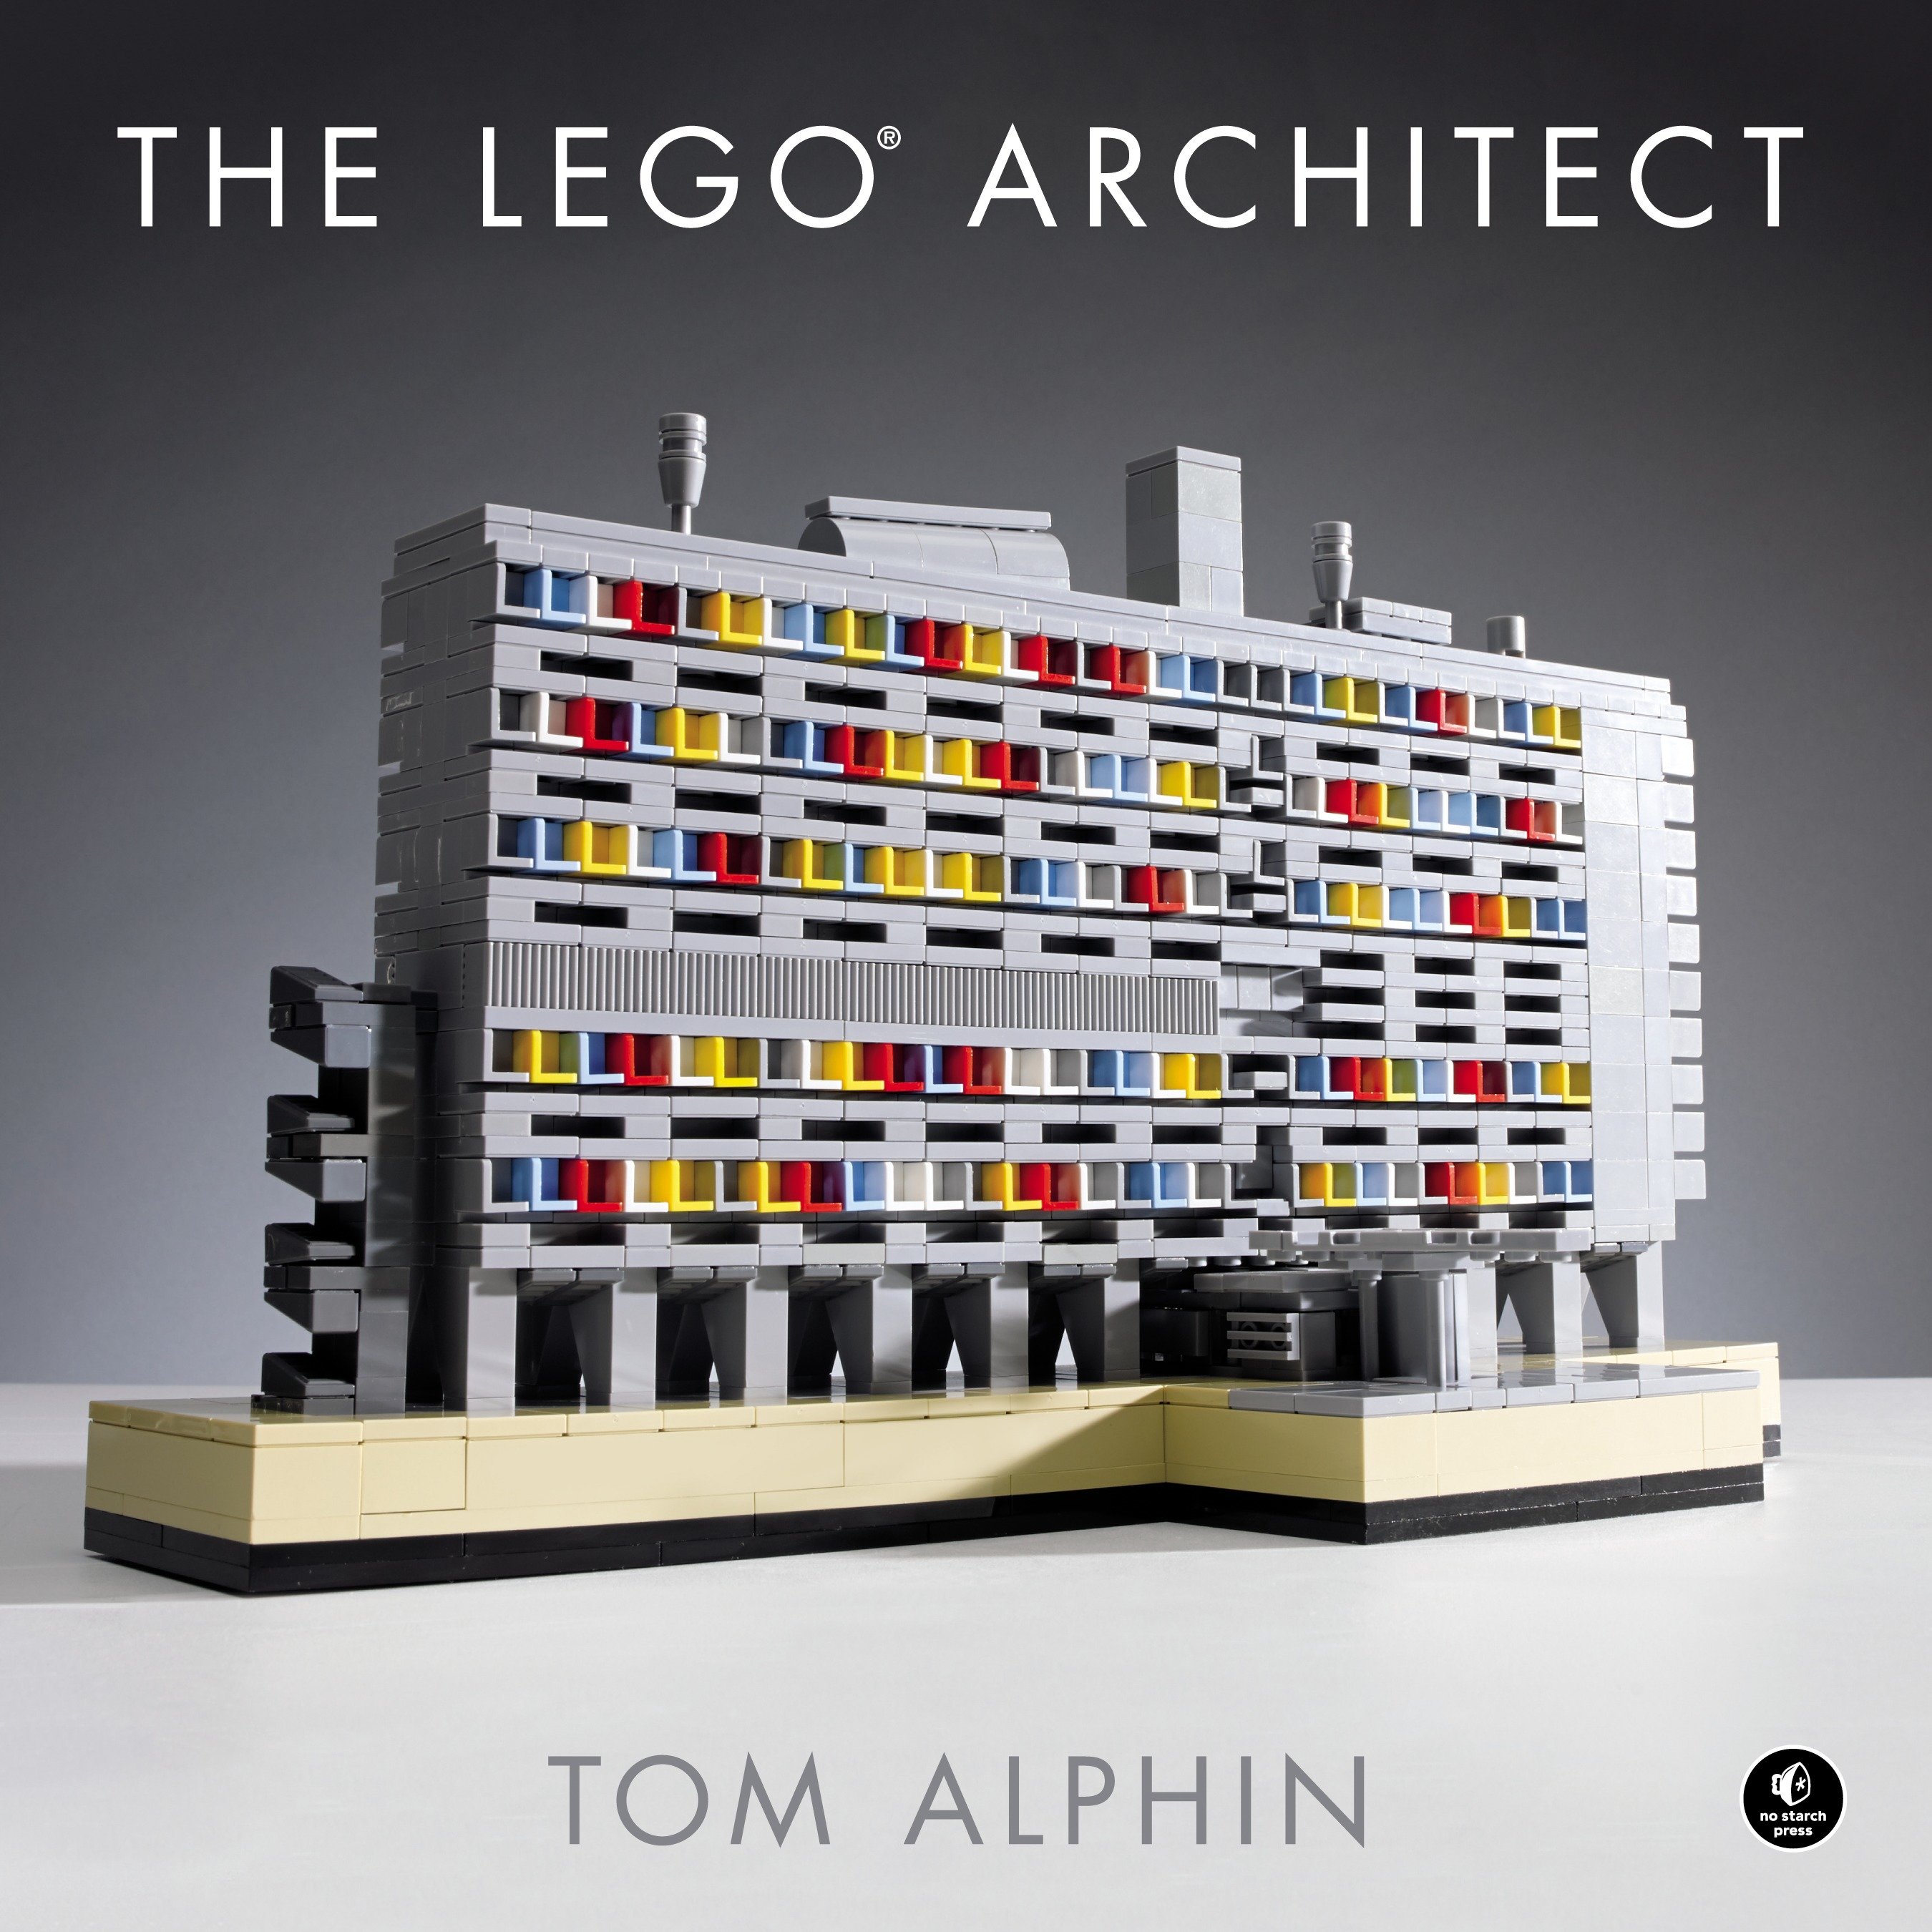 The Lego Architect (Hardcover Book)